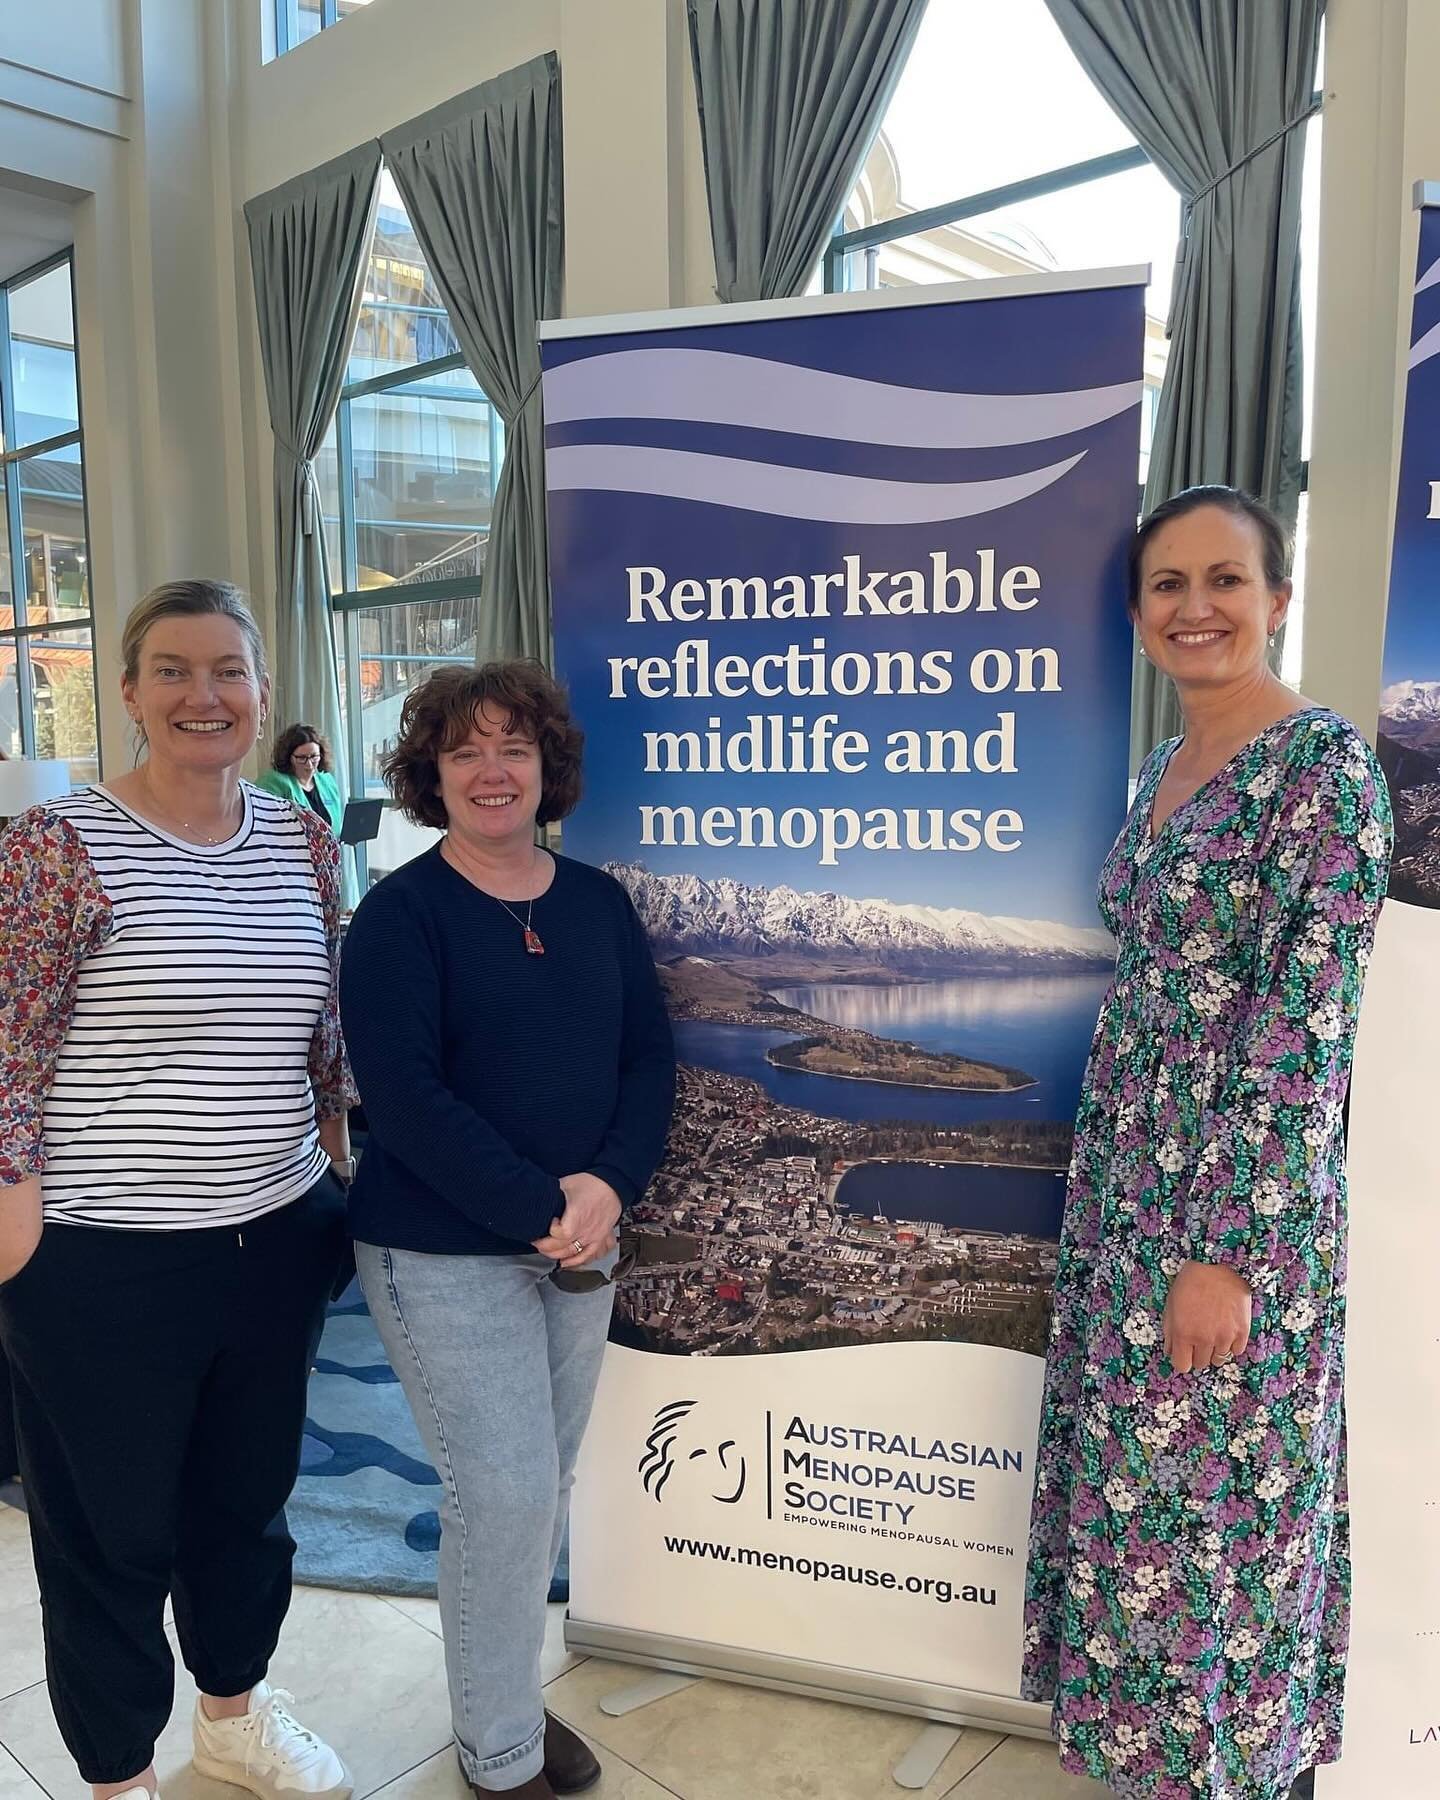 Bursting to bring you this FREE teaching session on understanding perimenopause/menopause !!! 🌸

Dr Maria Eastwood, Dr Tracy Ball and Dr Jenny hill from Dr Menopause present a session on the definitions, symptoms and how we can treat them. May 16th 